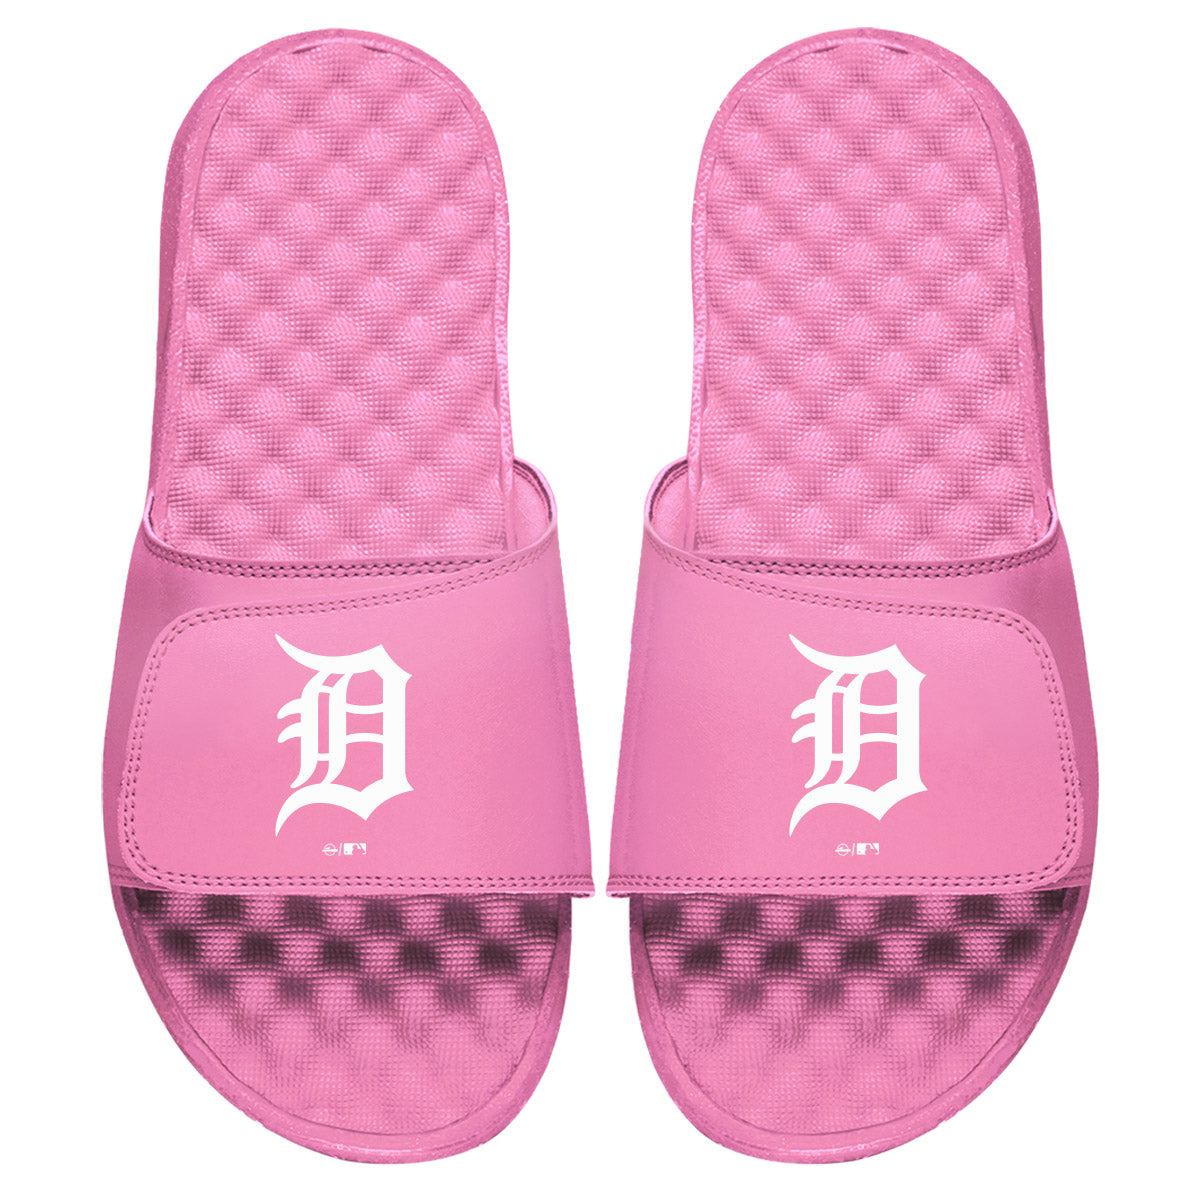 Islides Official - Detroit Tigers Primary Pink 6 / Pink Slides - Sandals - Slippers